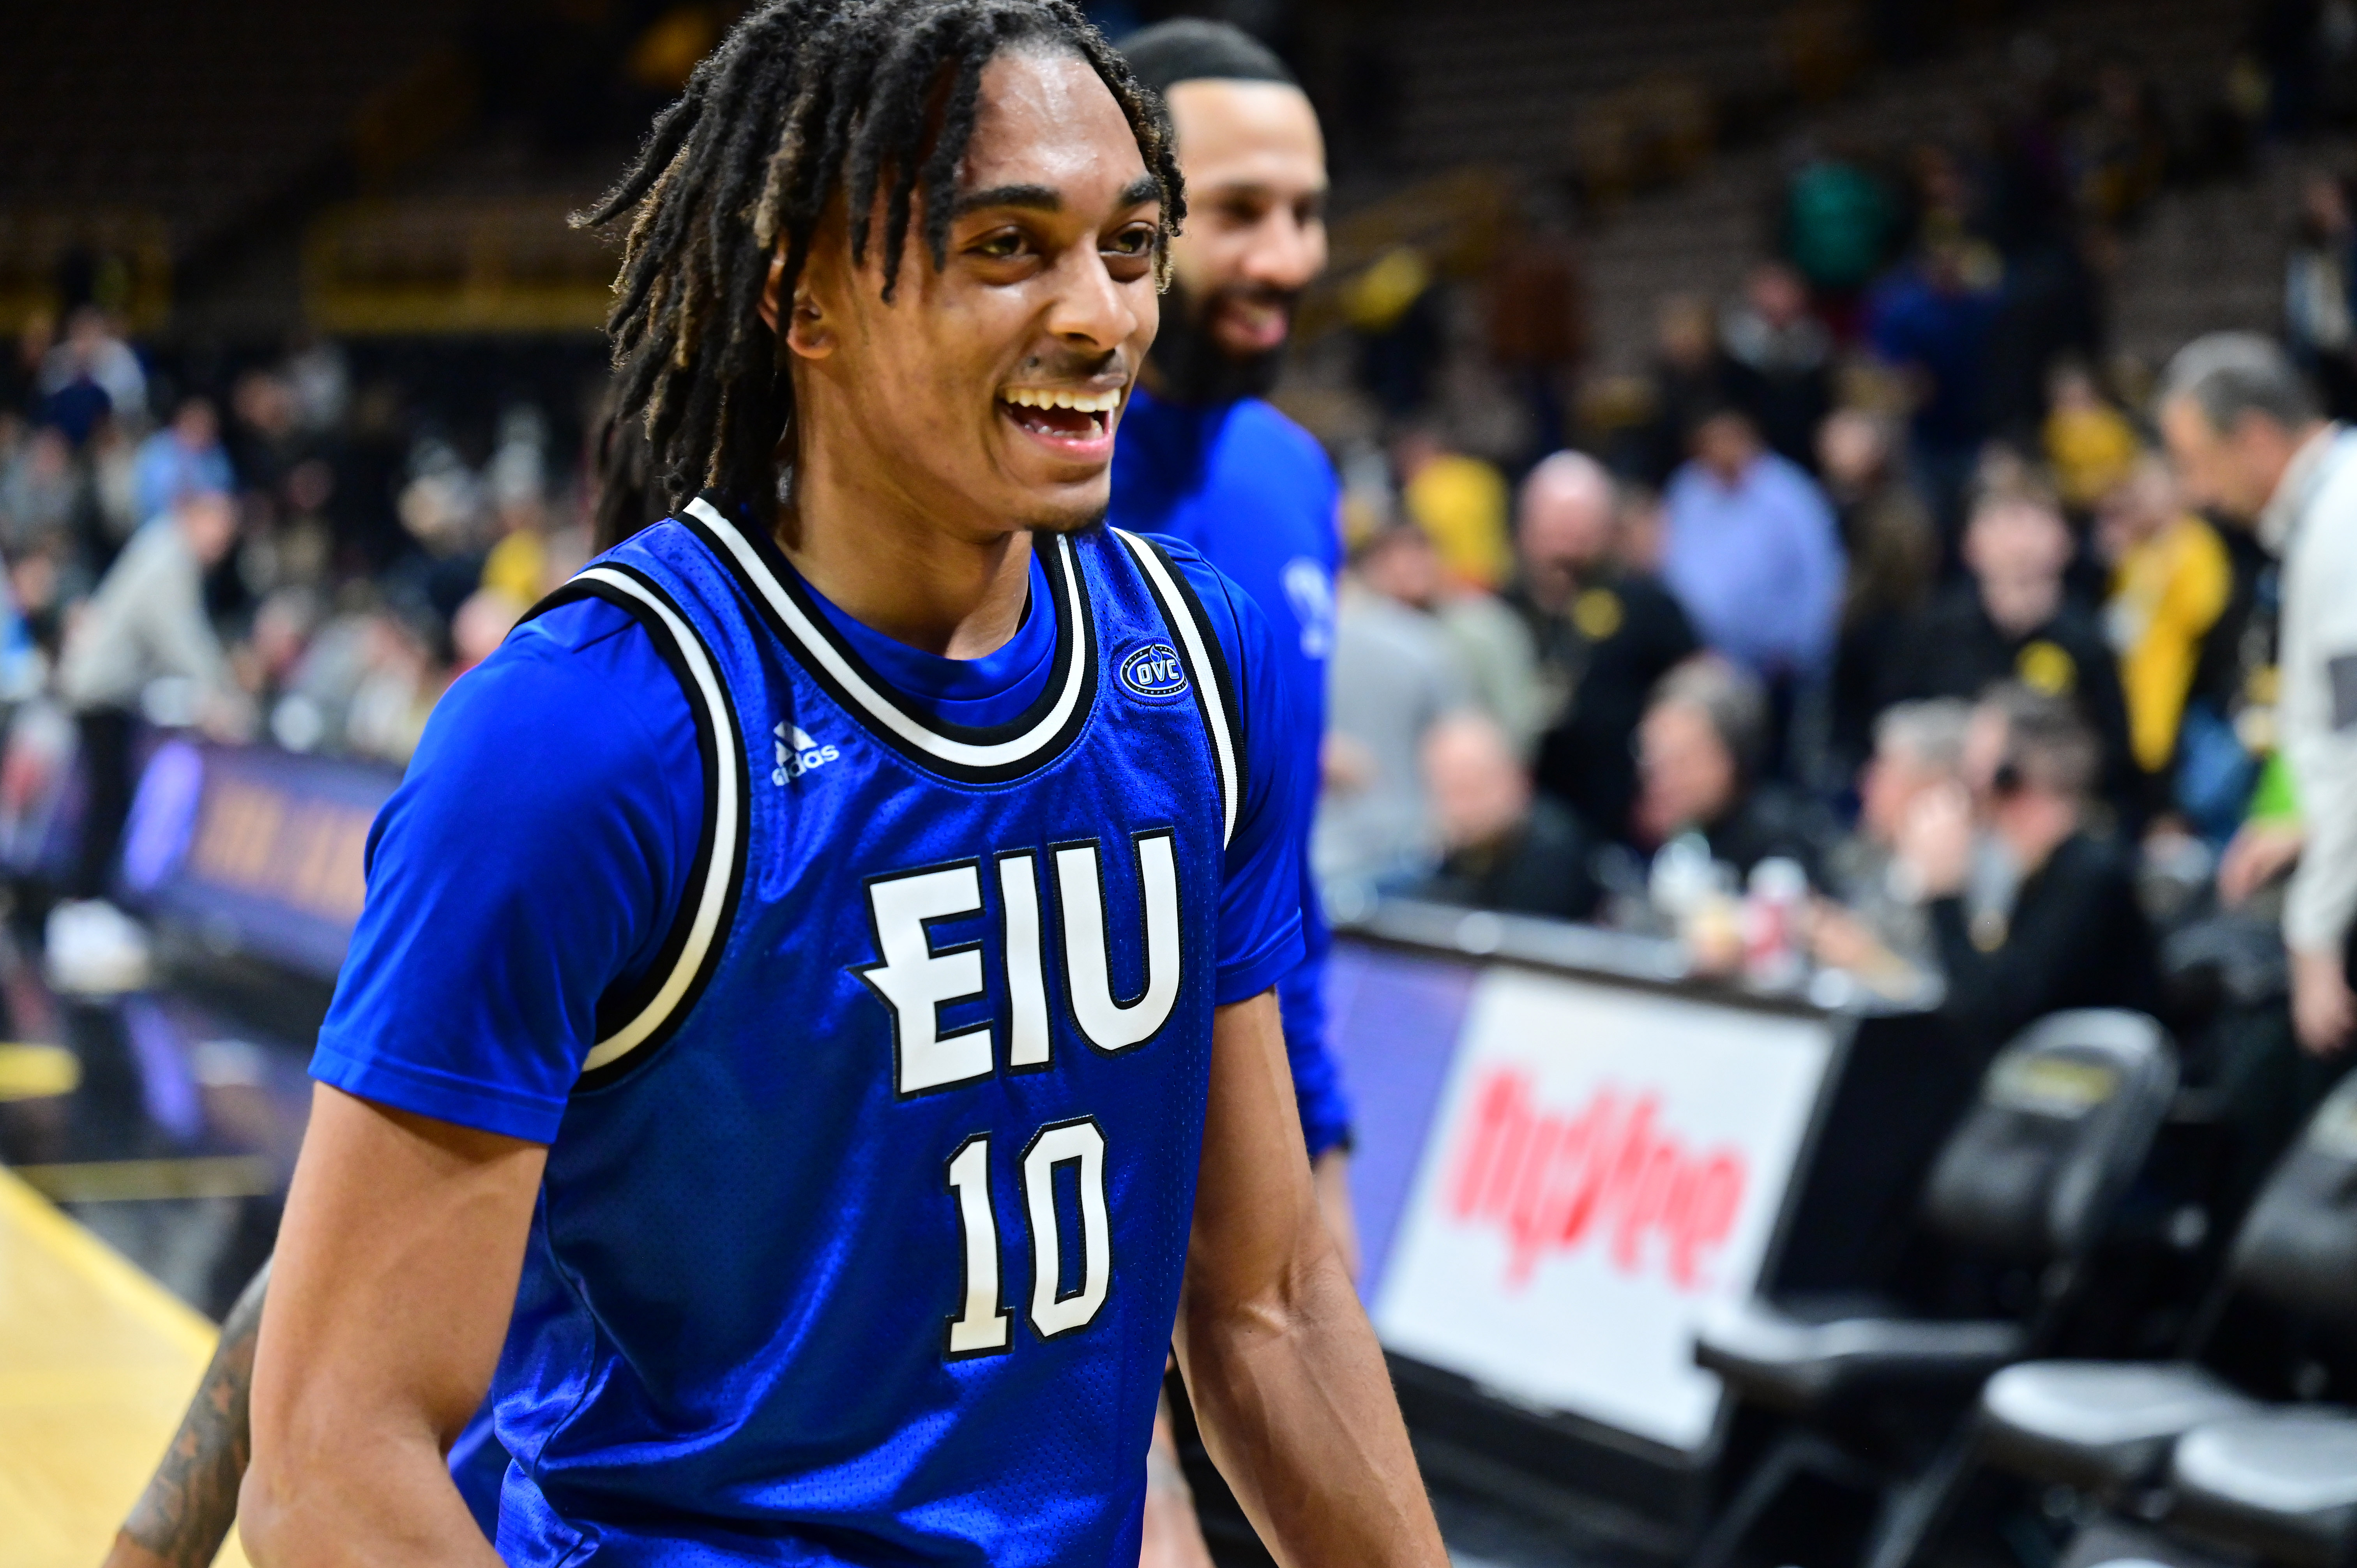 IOWA CITY, IA - DECEMBER 21: Eastern Illinois guard Kenyon Hodges (10) flashes a big smile as he walks off of the court after winning a college basketball game between the Eastern Illinois Panthers and the Iowa Hawkeyes on December 21, 2022